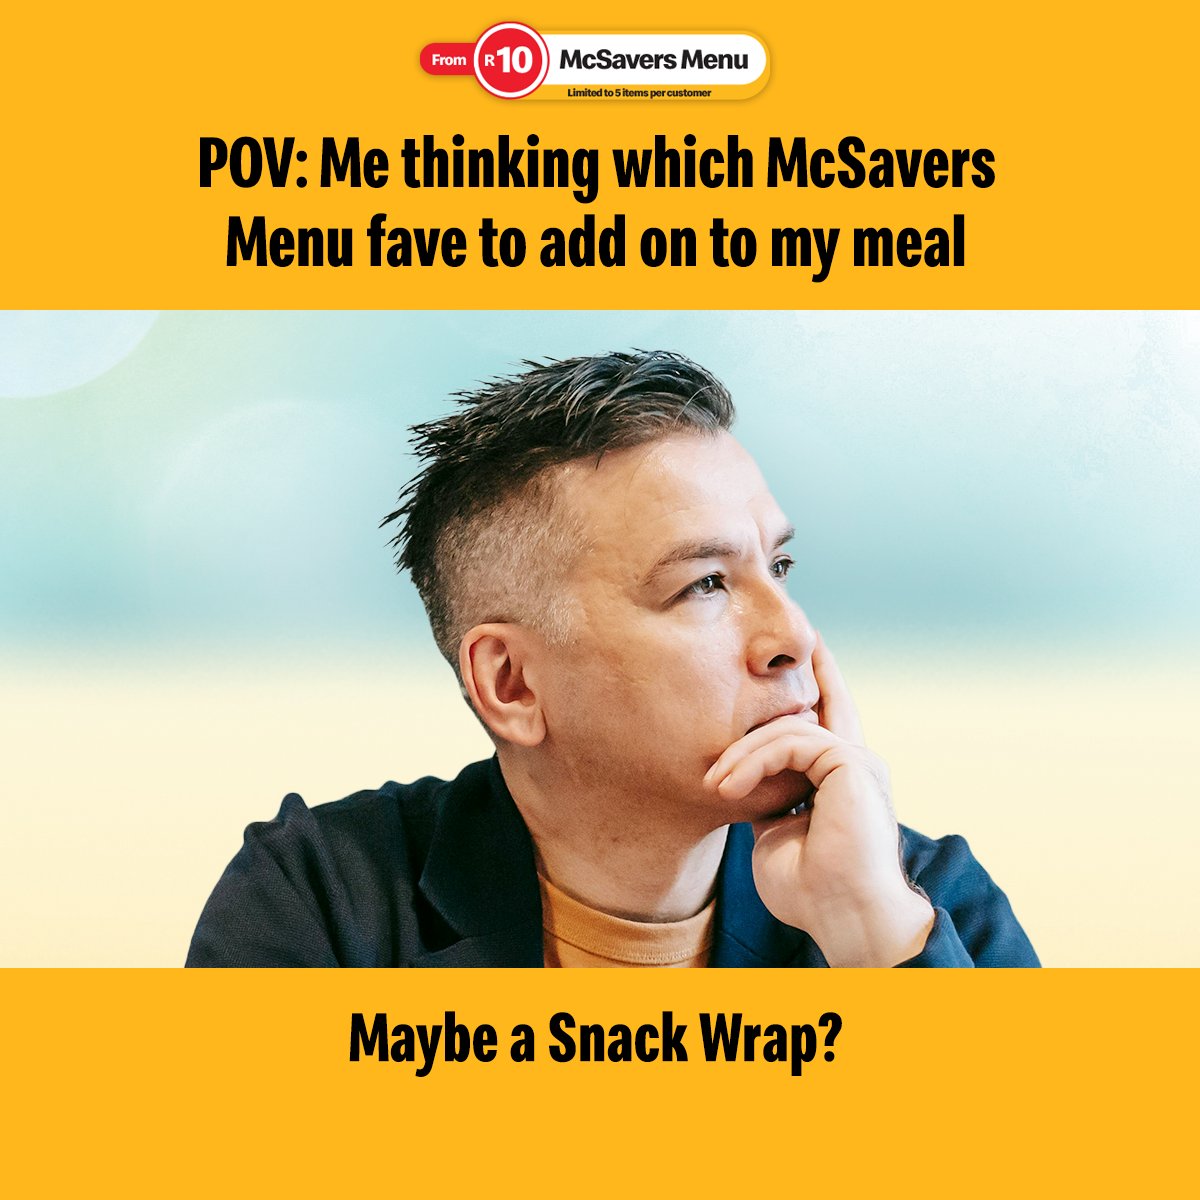 Every day is a different lunch adventure with McSavers Menu because who doesn’t want more for less! 😁🤭